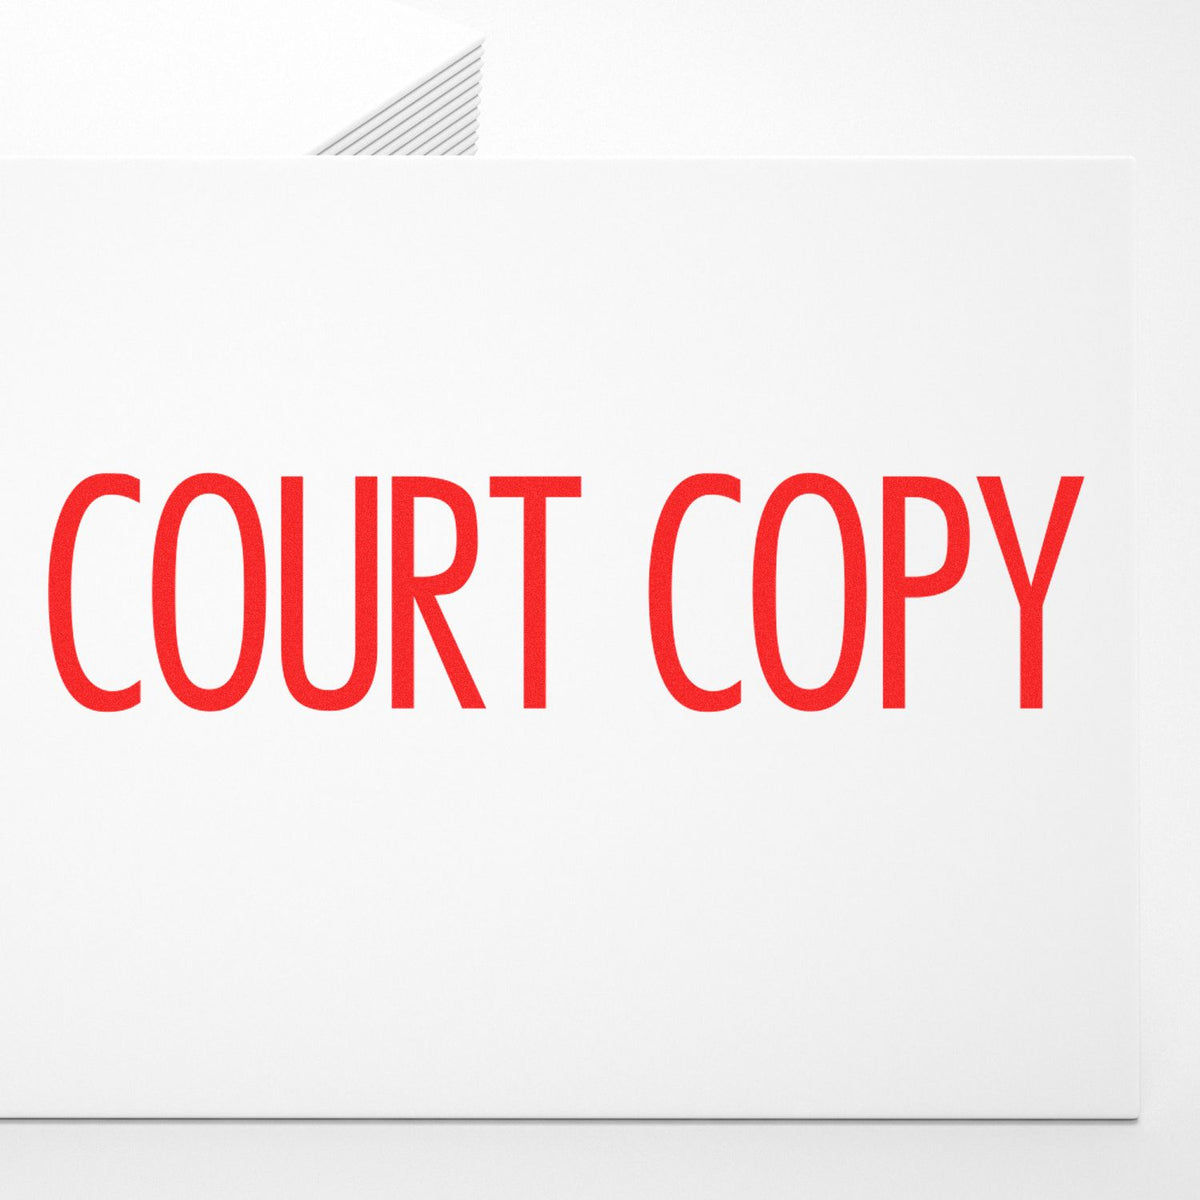 Narrow Font Court Copy Rubber Stamp In Use Photo